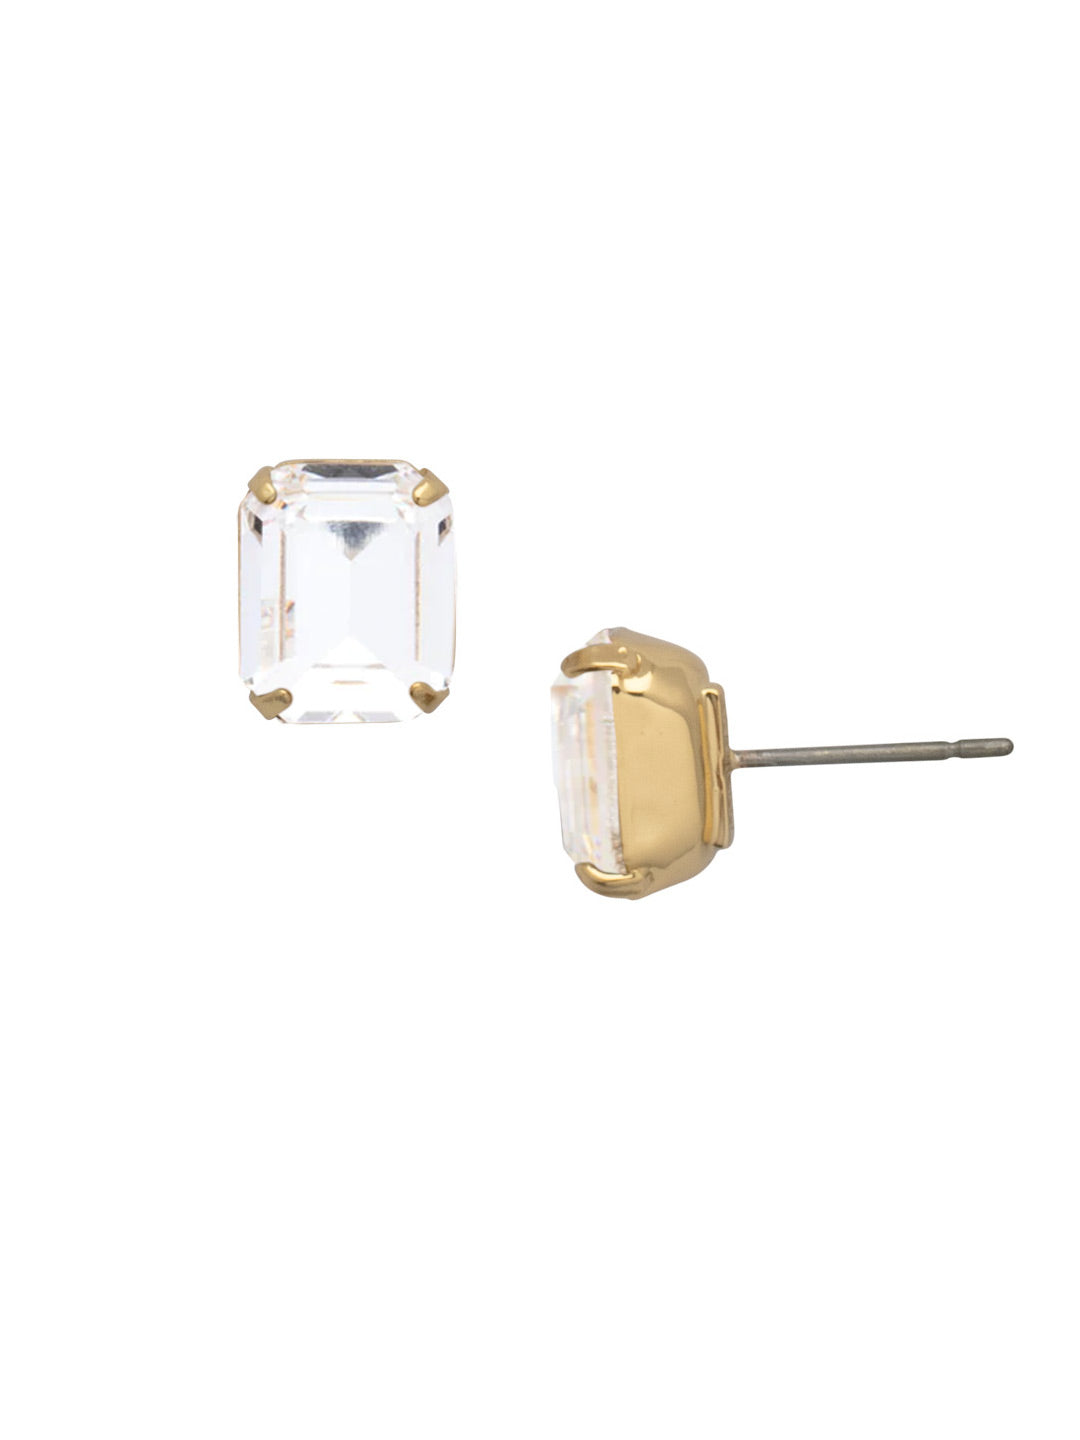 Octavia Stud Earrings - EDU53BGCRY - <p>These rounded emerald cut stud earrings can be worn alone or paired with anything for just a bit of extra bling! From Sorrelli's Crystal collection in our Bright Gold-tone finish.</p>